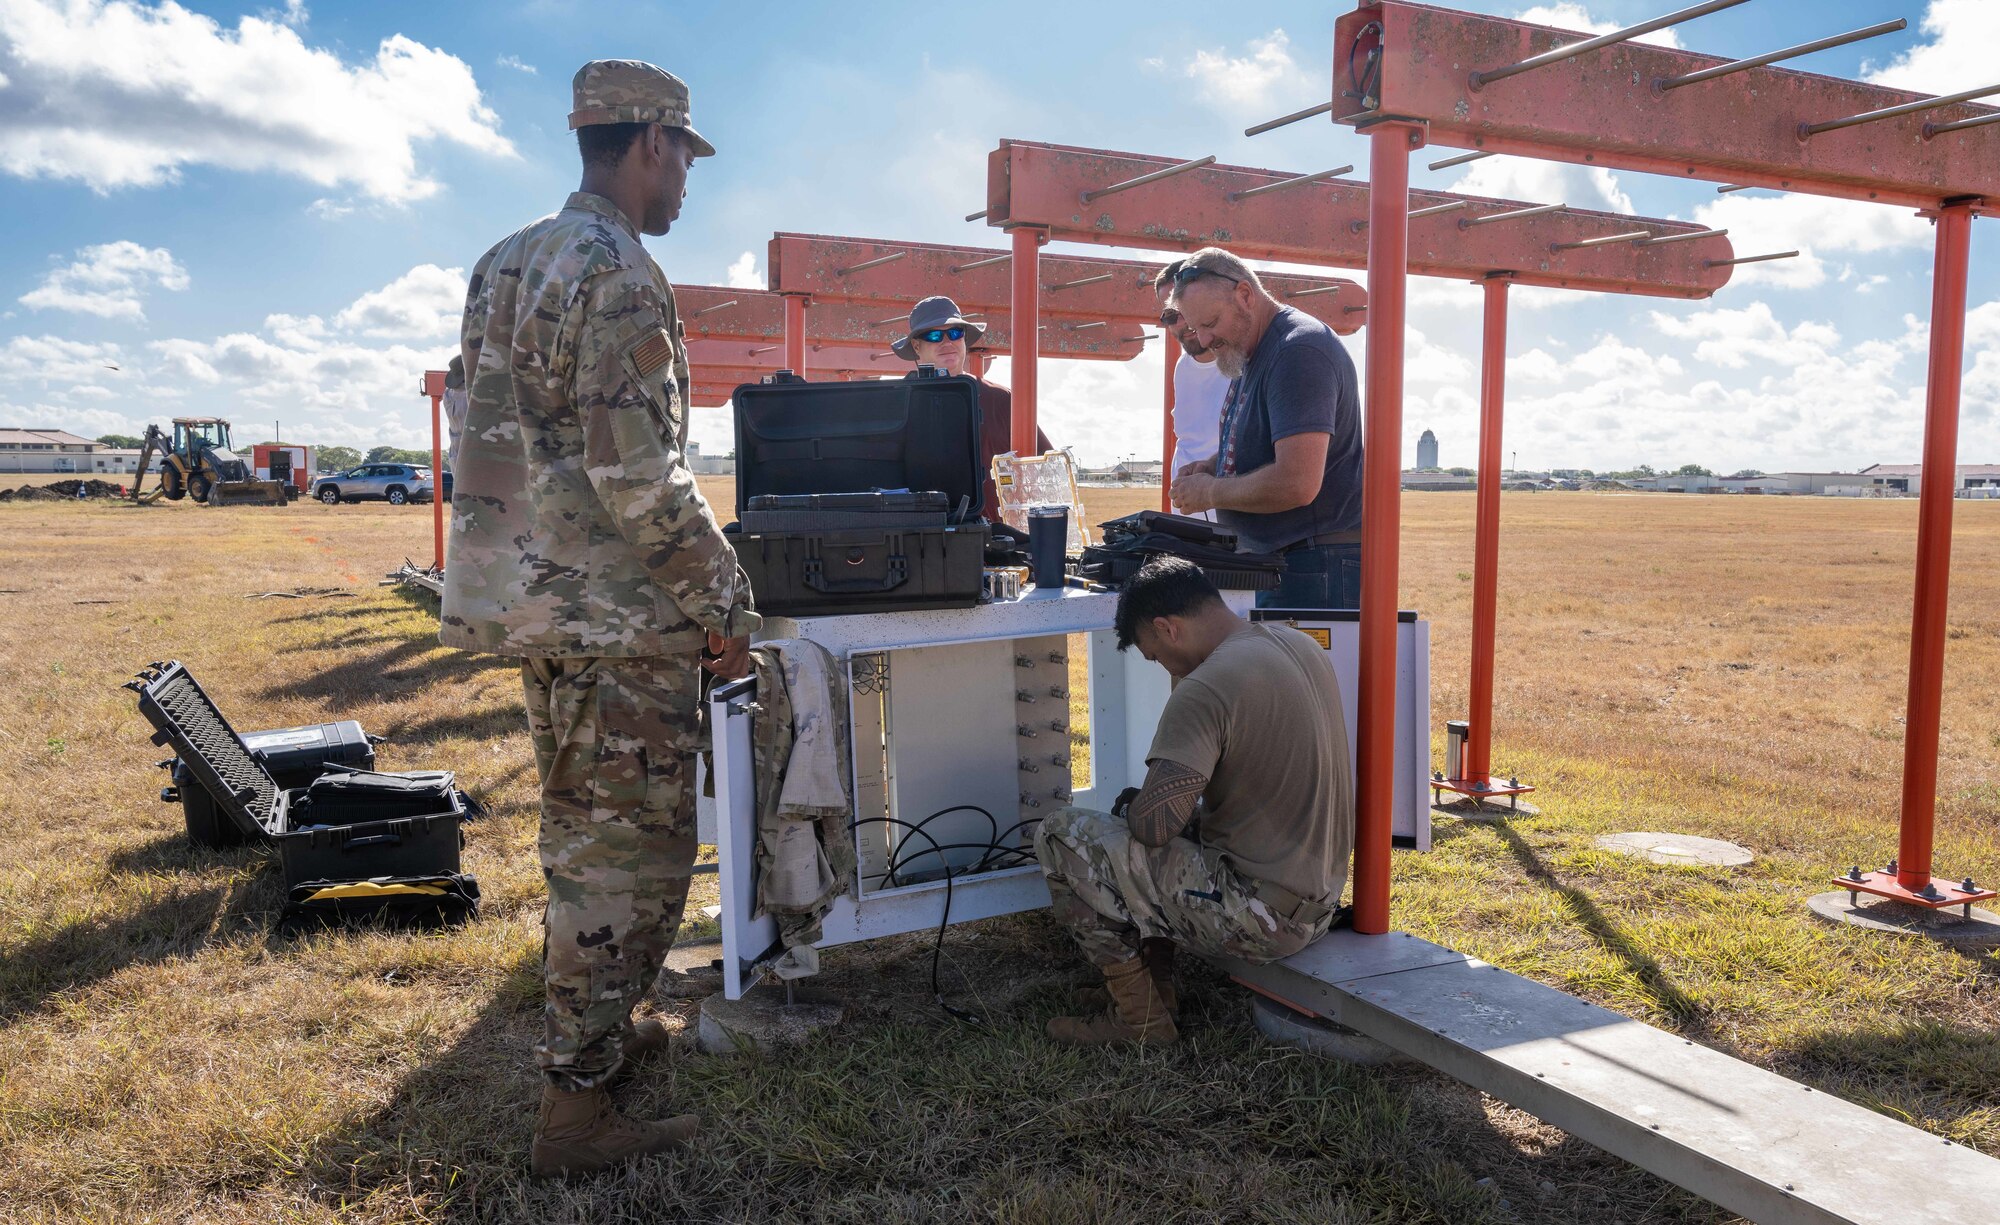 Members from the RAWS and 502nd Civil Engineering team worked tirelessly to fix the damaged localizer shelter in record time resulting in zero missed training sorties.